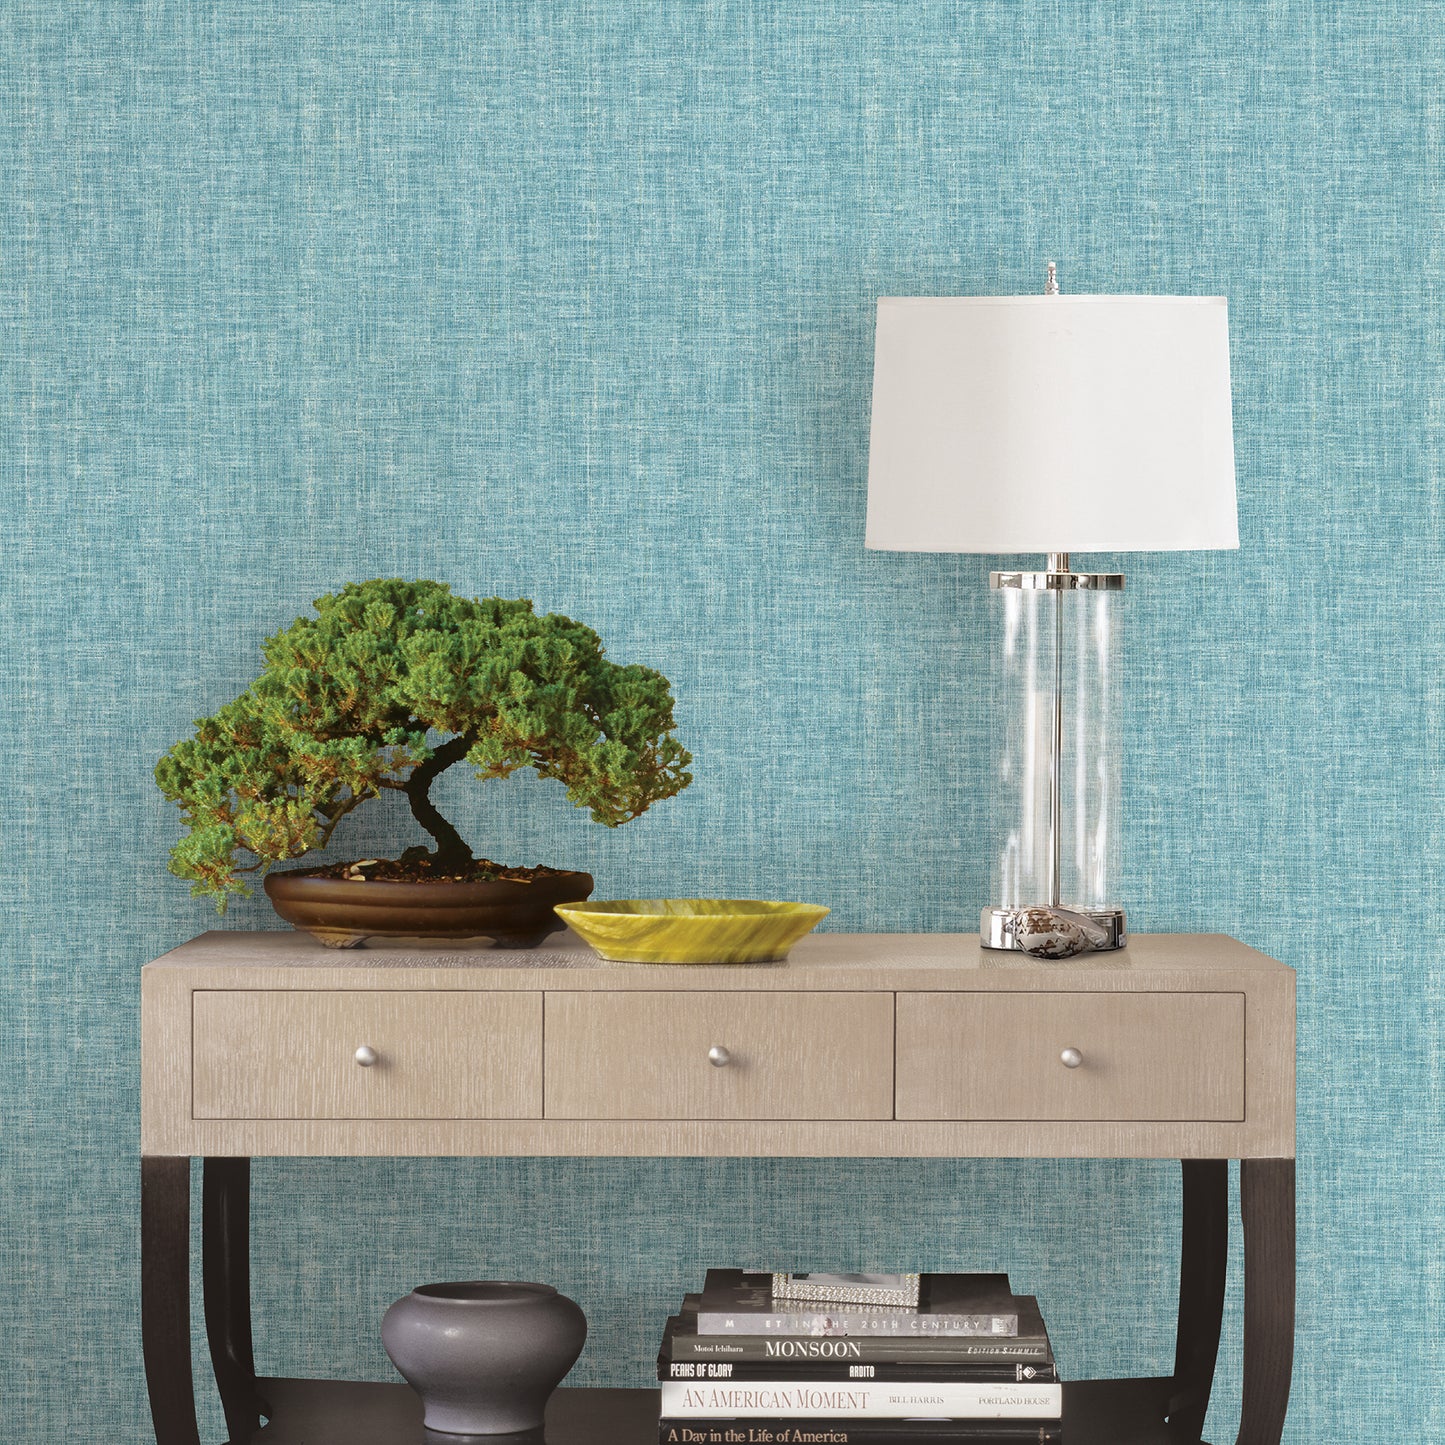 Purchase 2702-22754 Oasis Turquoise Linen by A-Street Prints Wallpaper